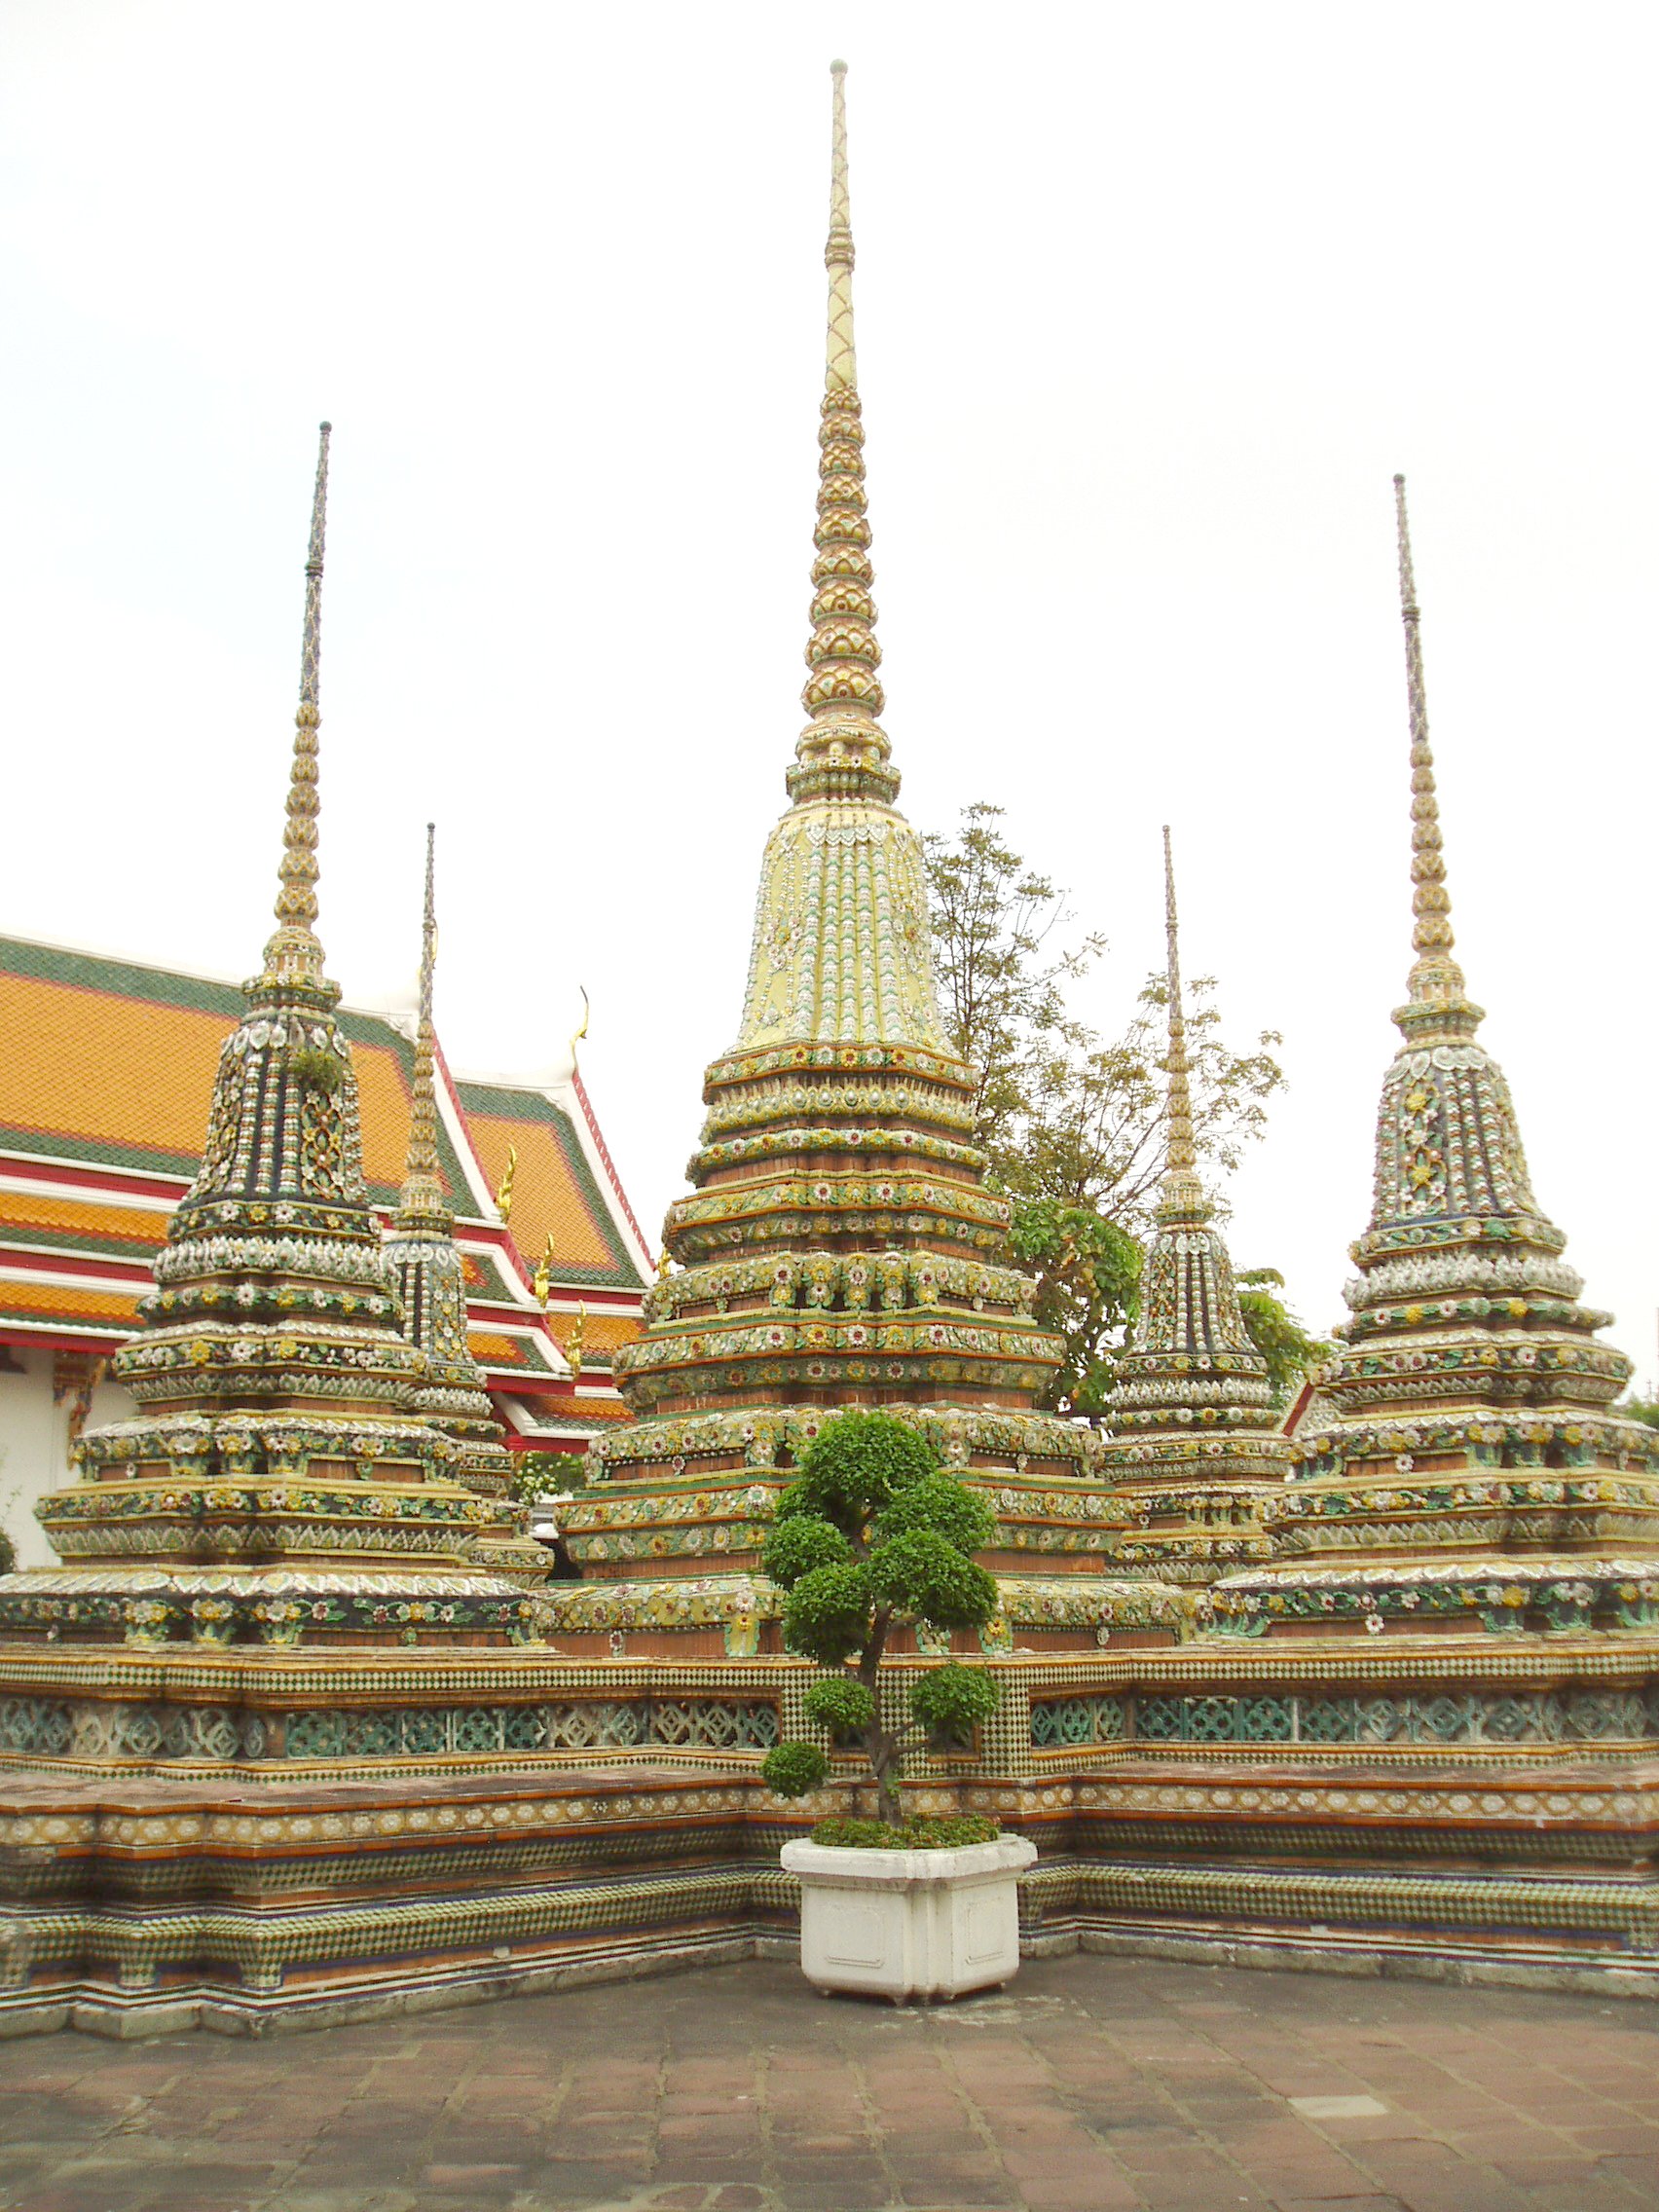 Miniature Stupas, Wat Pho, Bangkok Wat Pho is the largest and oldest temple complex in Bangkok, and along with the temmple of the royal palace the most visited. The sprawling complex covers a huge area and it is quite easy to lose oneself within it's series of courtyards, gateways and stunning temple buildings. The present complex largely dates back to 1788, having been founded in response to the sacking of the former capital Ayutthaya by the Burmese in 1767 where a similar complex was destroyed. It is known as a place of learning and has a renowned school of Thai massage within the site. The temple complex is entered through one of many gateways guarded by huge Chinese statues, believed to have been imported as ballast on ships trading with China..The outer gates have fierce warrior figures, whilst the inner courtyards have the bizarre 'farang' ('foreigner') figures with their peculiar 'top hats', believed to represent the first European visitors to the east. Many of the inner courtyards are surrounded by a cloister containing over 400 sculptures of the seated Buddha, whilst the main Bot, the spiritual nucleus of the temple, is beautifully decorated within with frescoes of rich landscapes in red and gold. The biggest and most spectacular attraction of the temple however is the Hall of the Reclining Buddha, housing an enormous gilded recumbent figure of the Buddha over 160ft long, filling the entire centre of the chamber. en.wikipedia.org/wiki/Wat_Pho